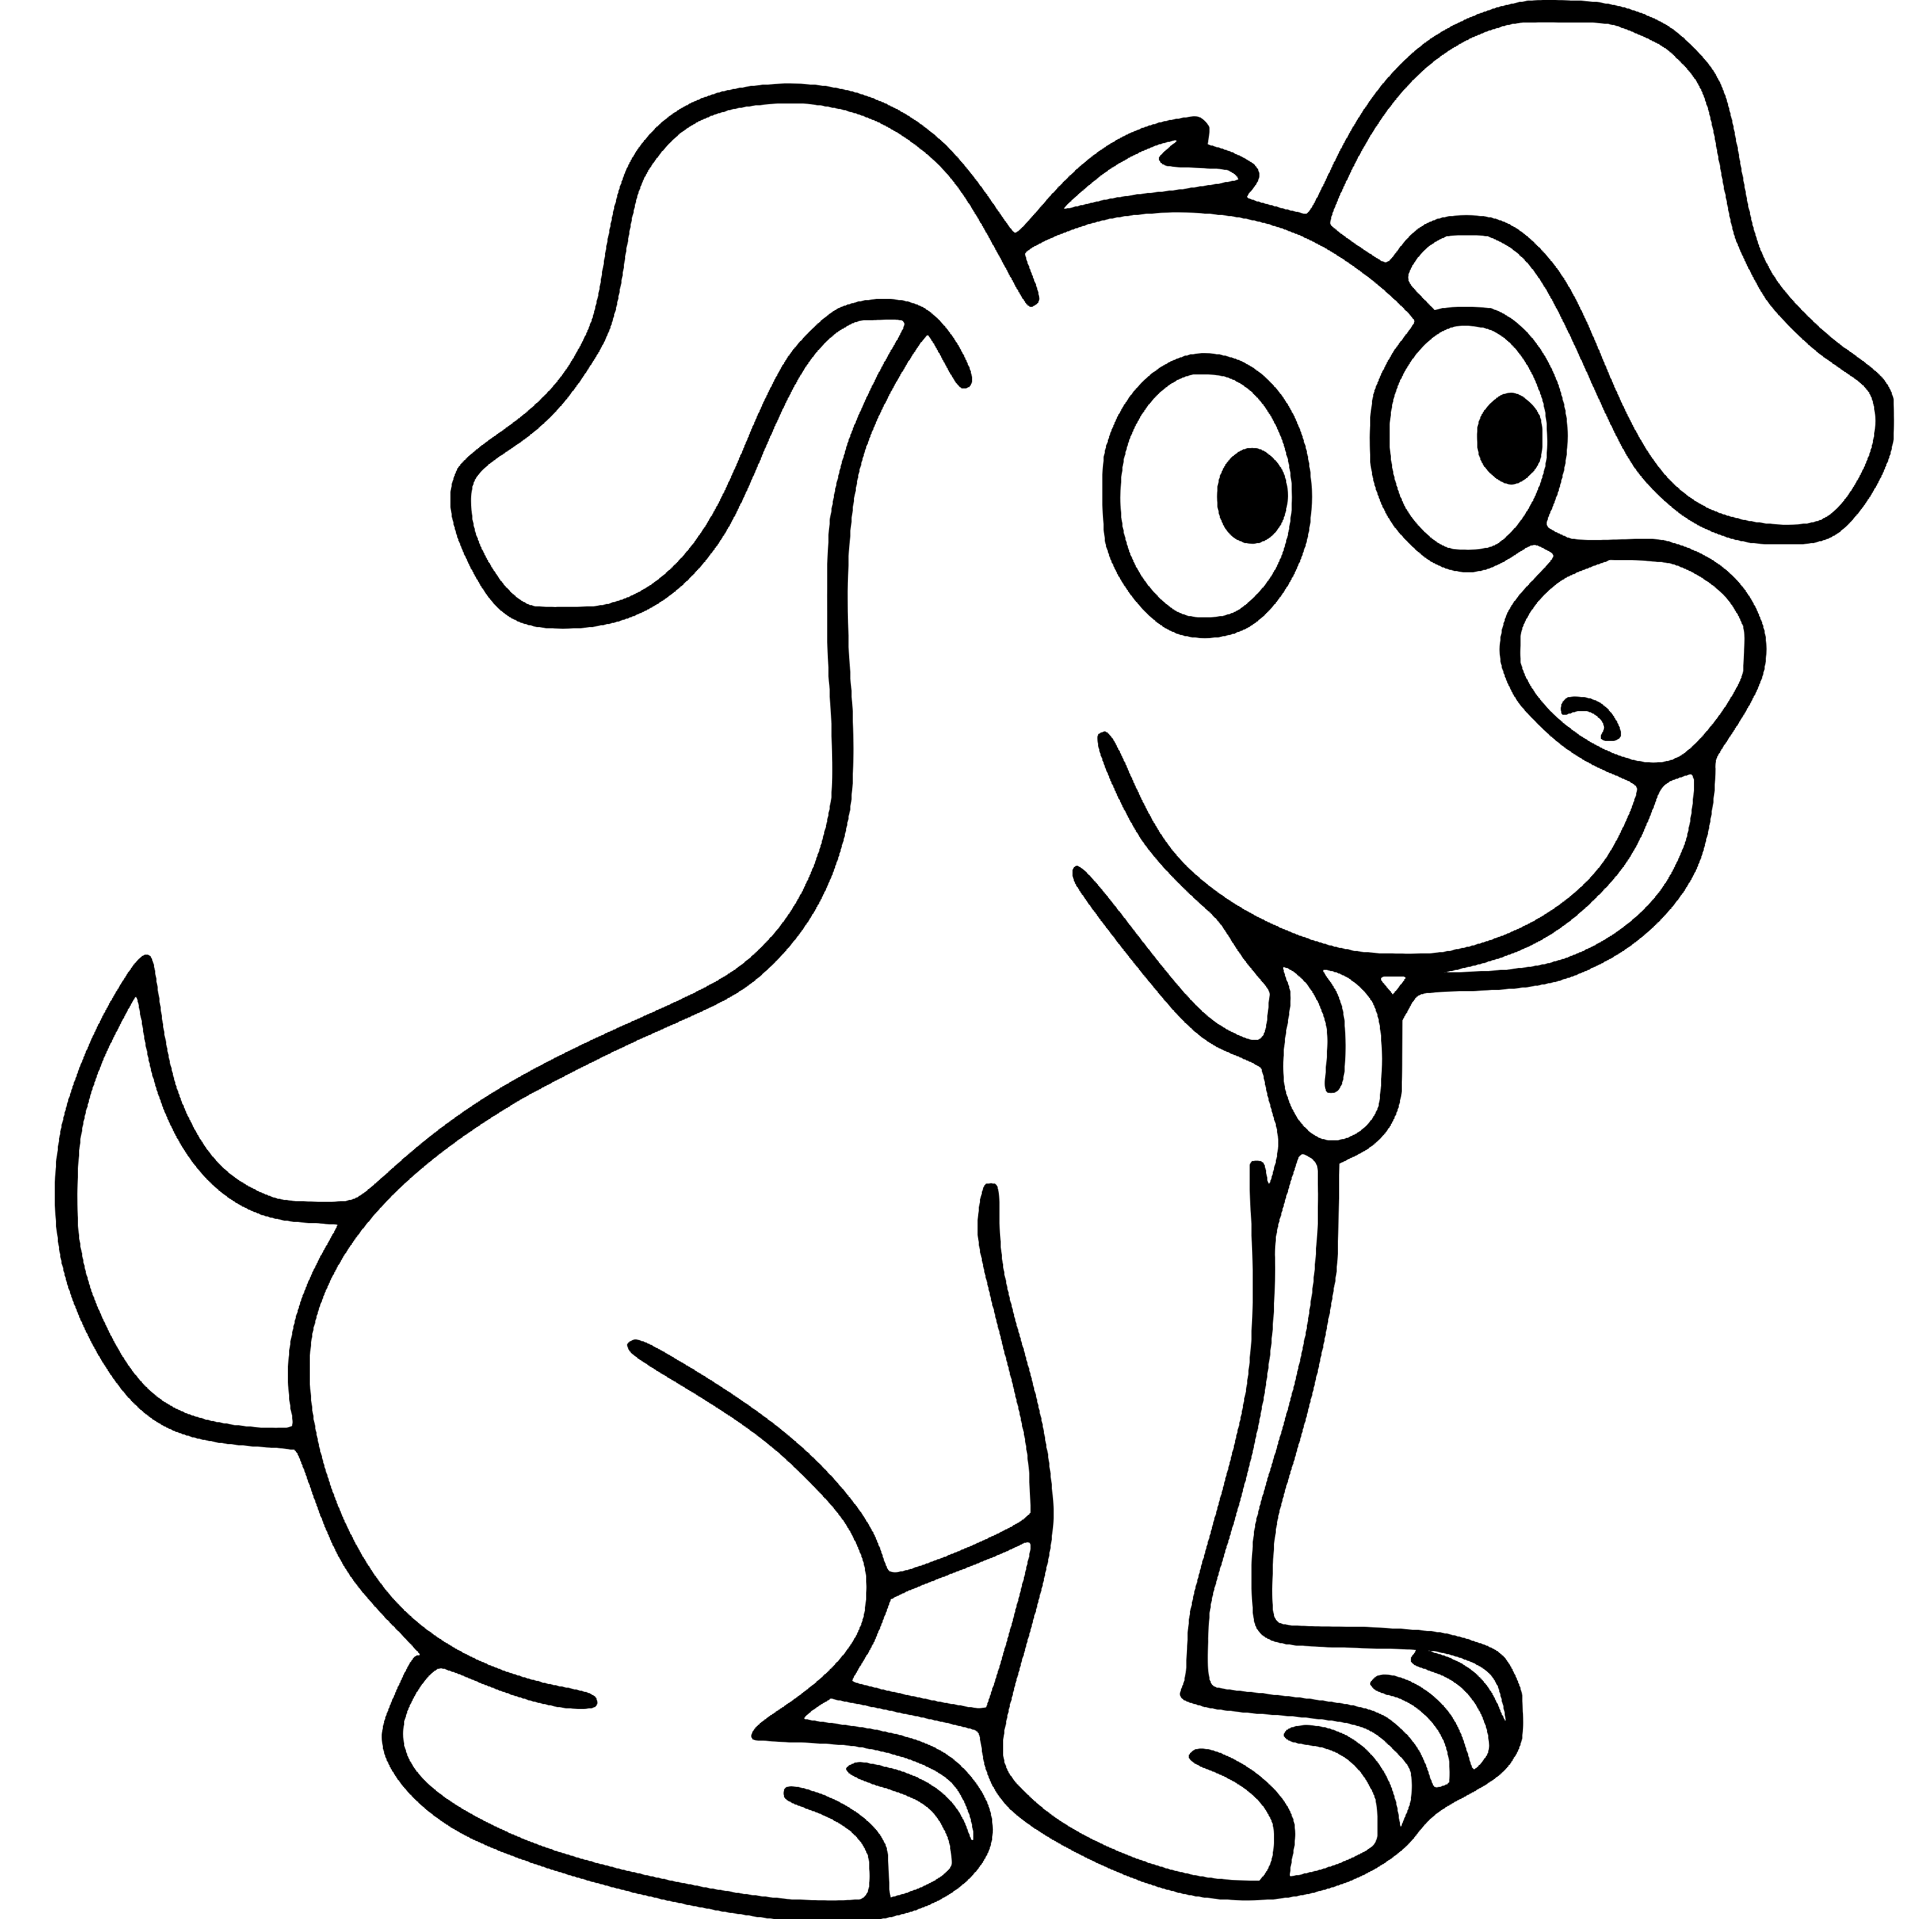 Printable Little Puppy Coloring Page for kids.